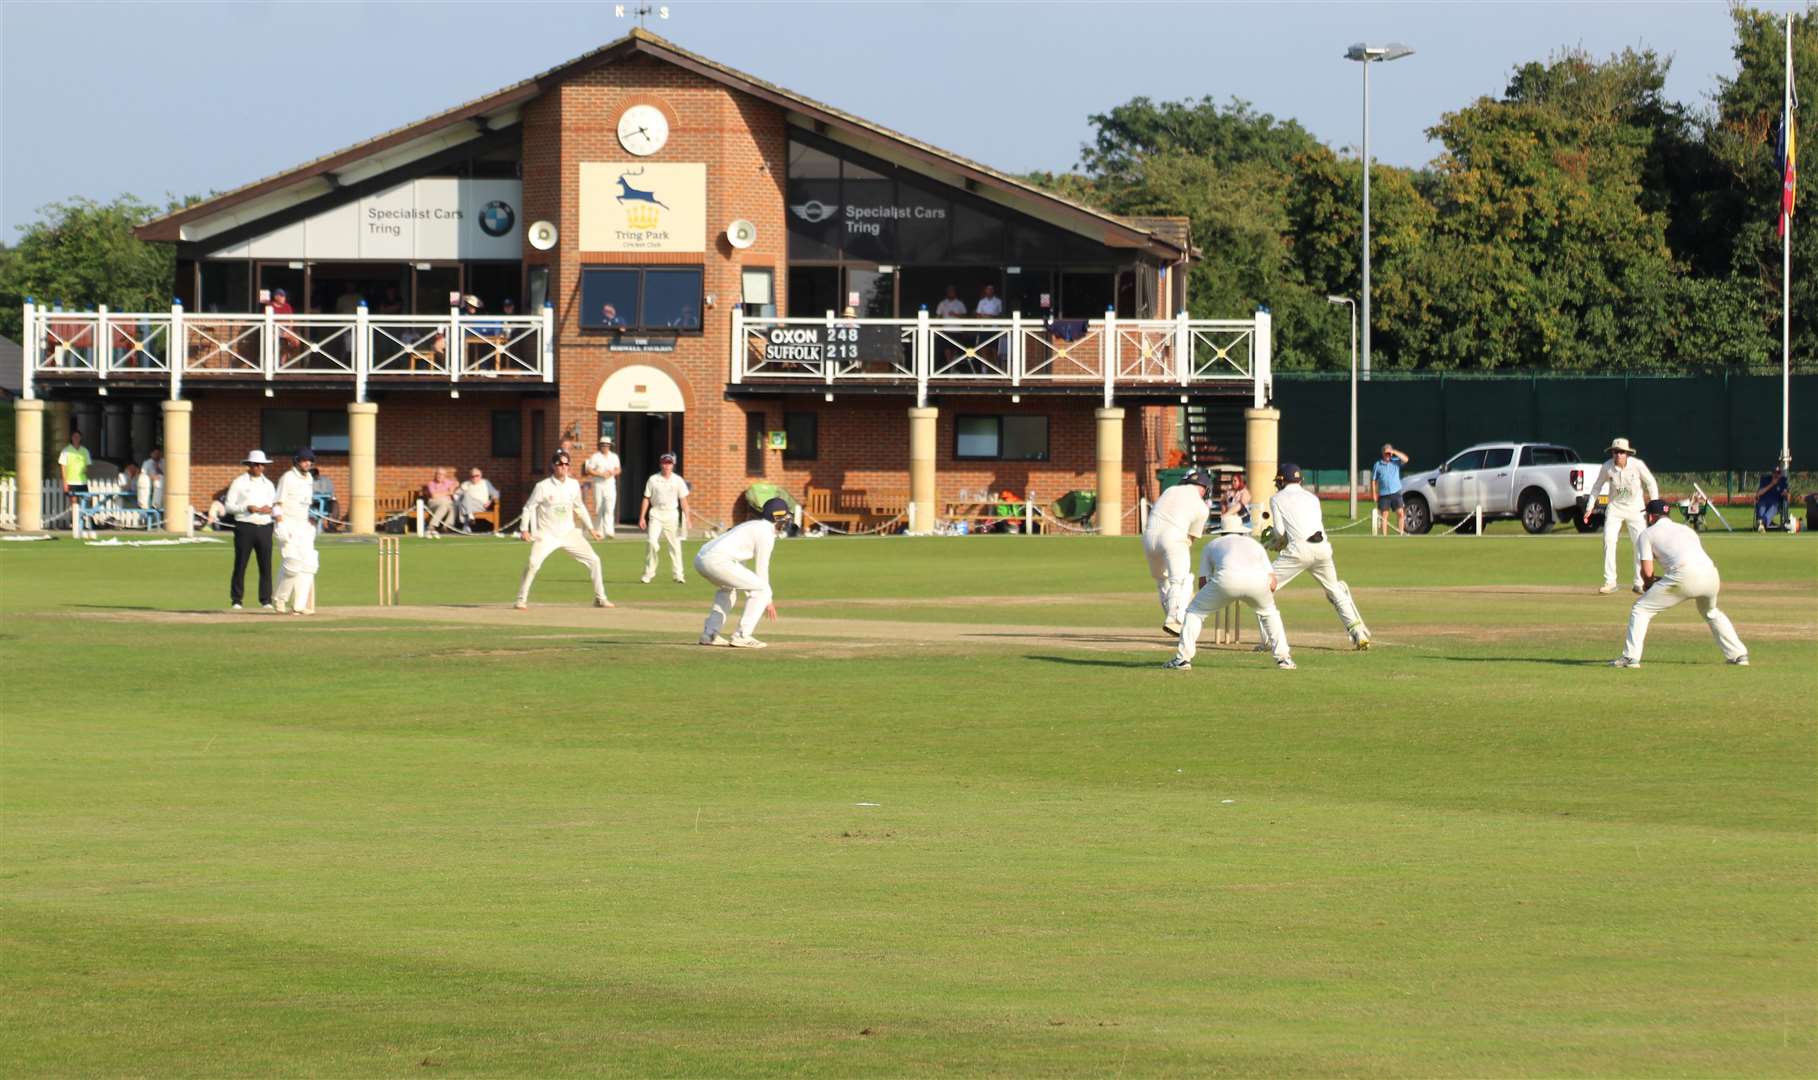 Suffolk fielding against Oxfordshire in the 2021 play-off final at Tring Park CC, where they will face current National Counties champions Buckinghamshire in their opening three-day fixture next season. Picture: Nick Garnham